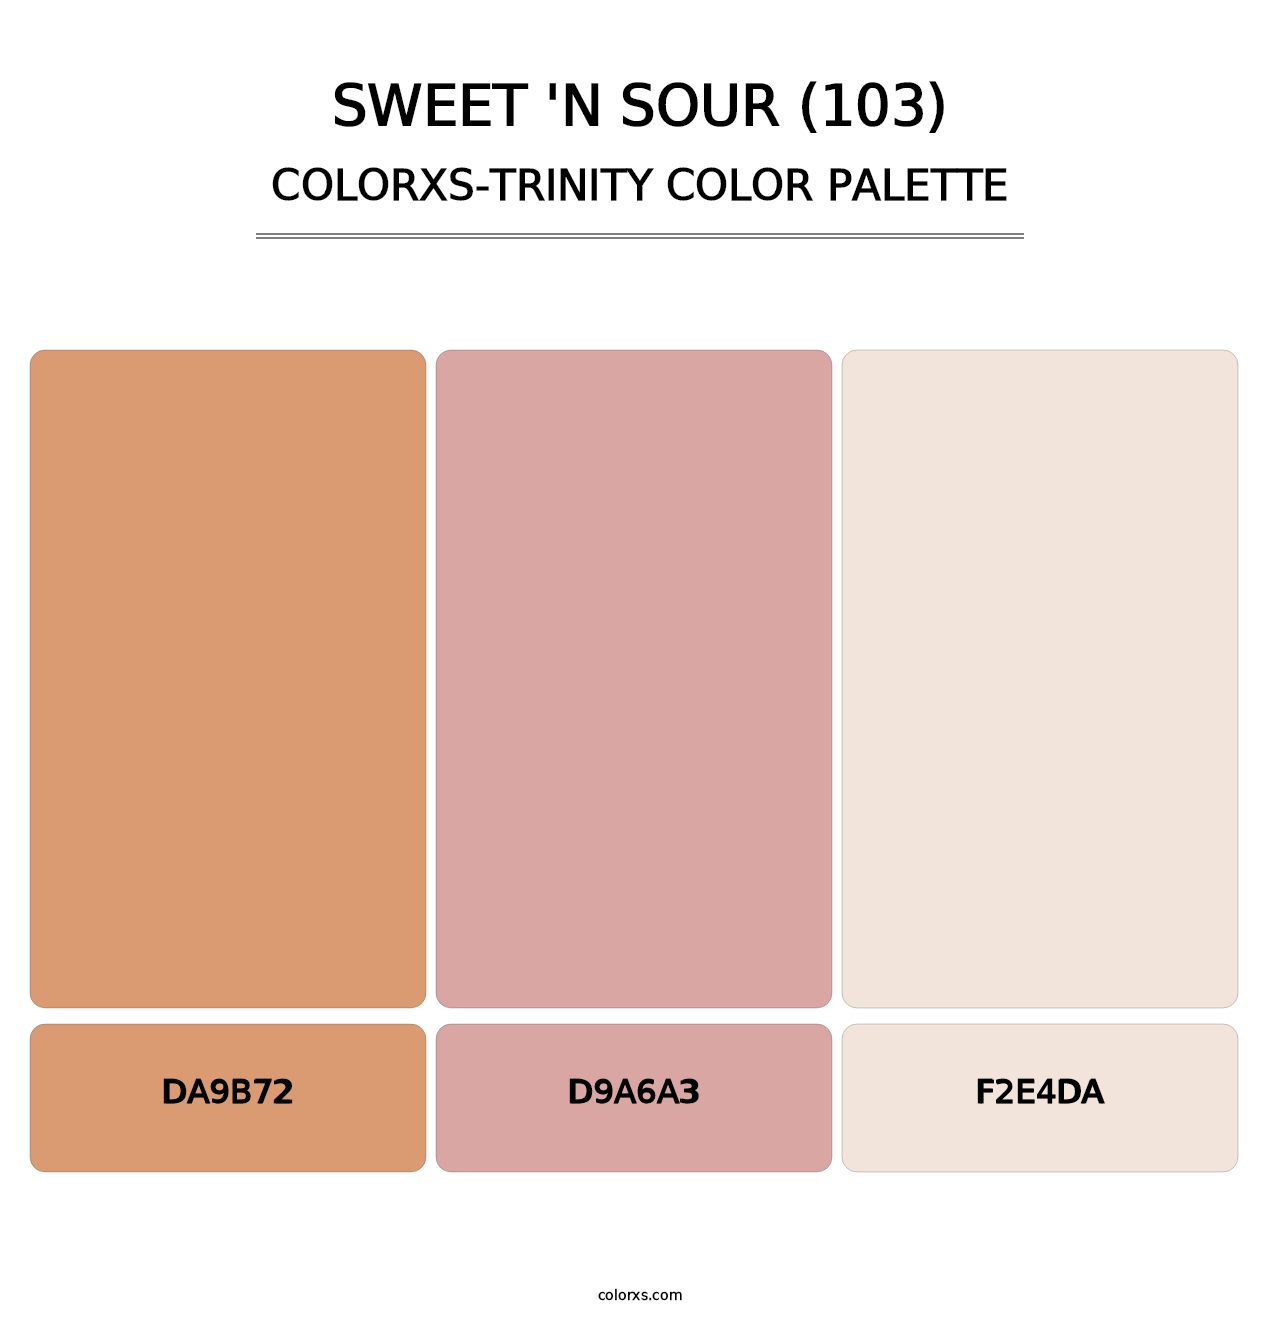 Sweet 'n Sour (103) - Colorxs Trinity Palette